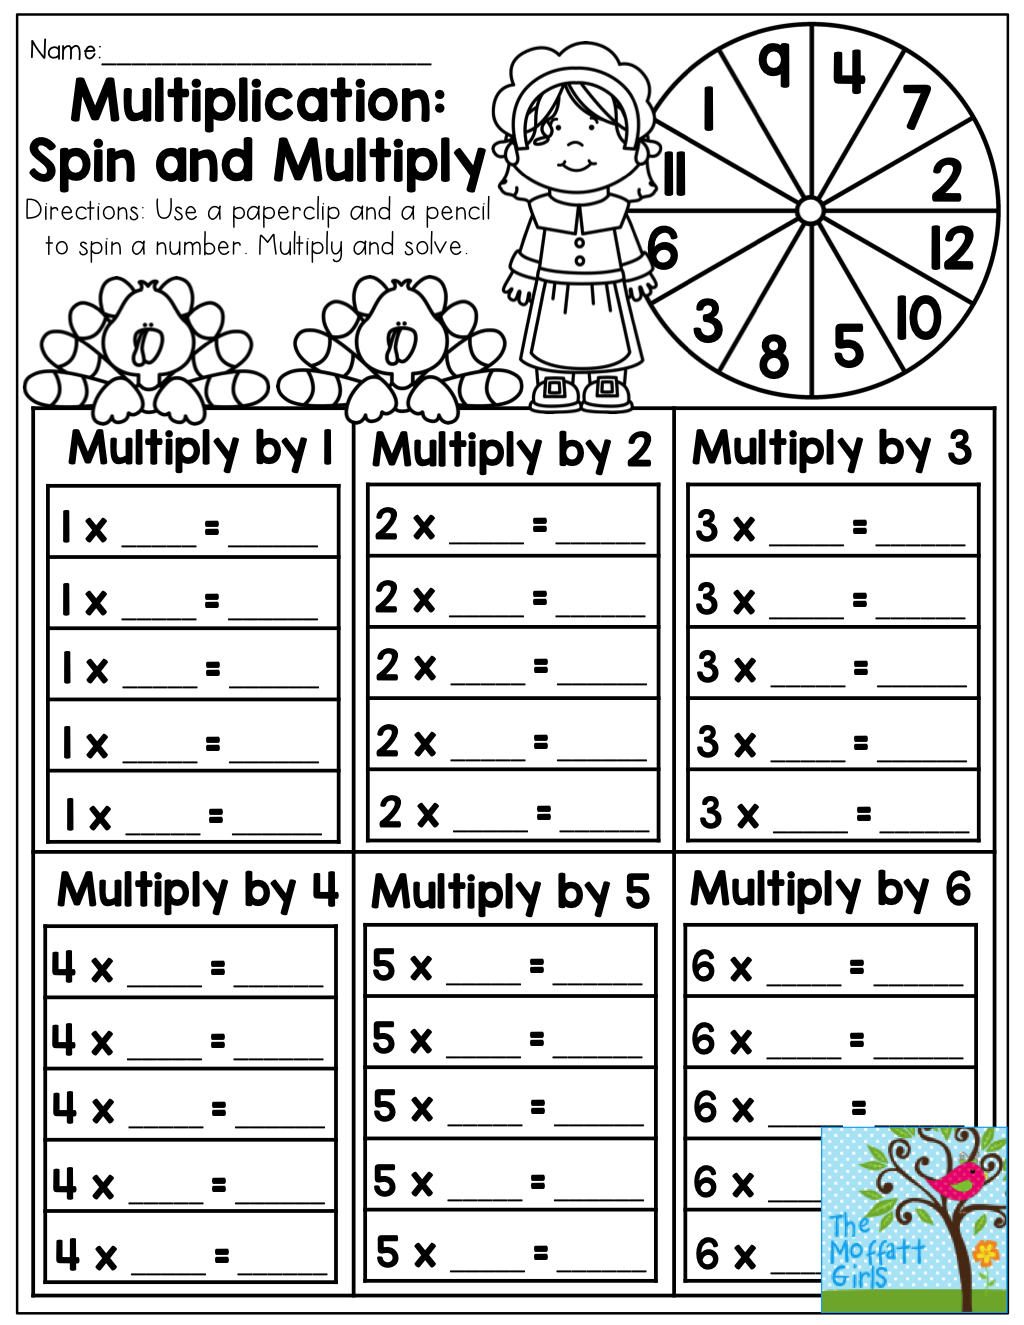 Multiplication: Spin And Multiply- Such A Fun Multiplication with regard to Multiplication Worksheets And Games